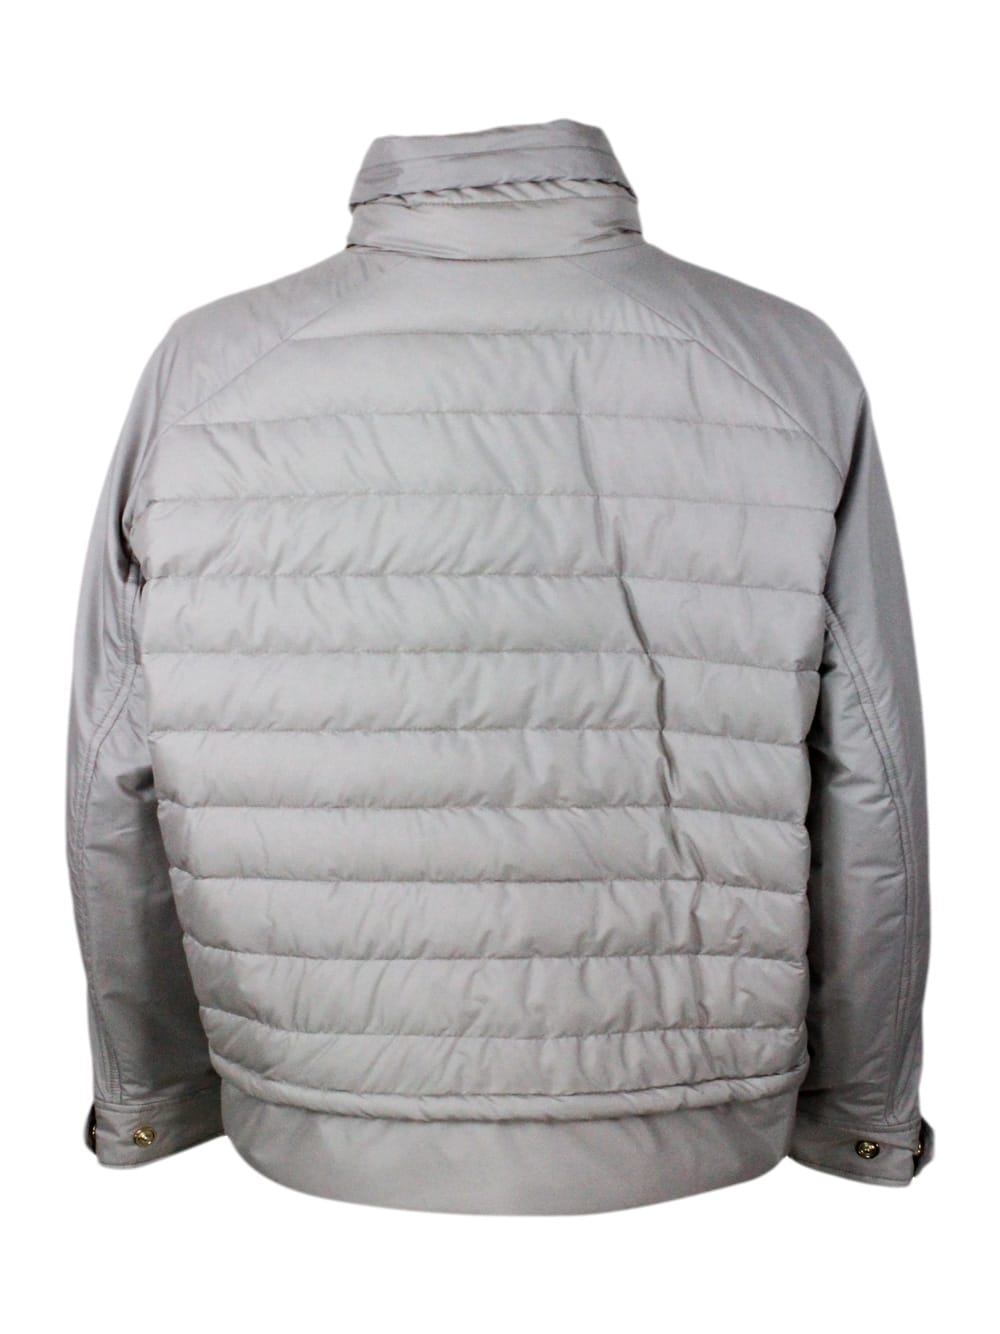 Shop Moorer Lightweight 100 Gram Fine Down Jacket With An A-line Shape And Adjustable Drawstring At The Hem And  In Ice